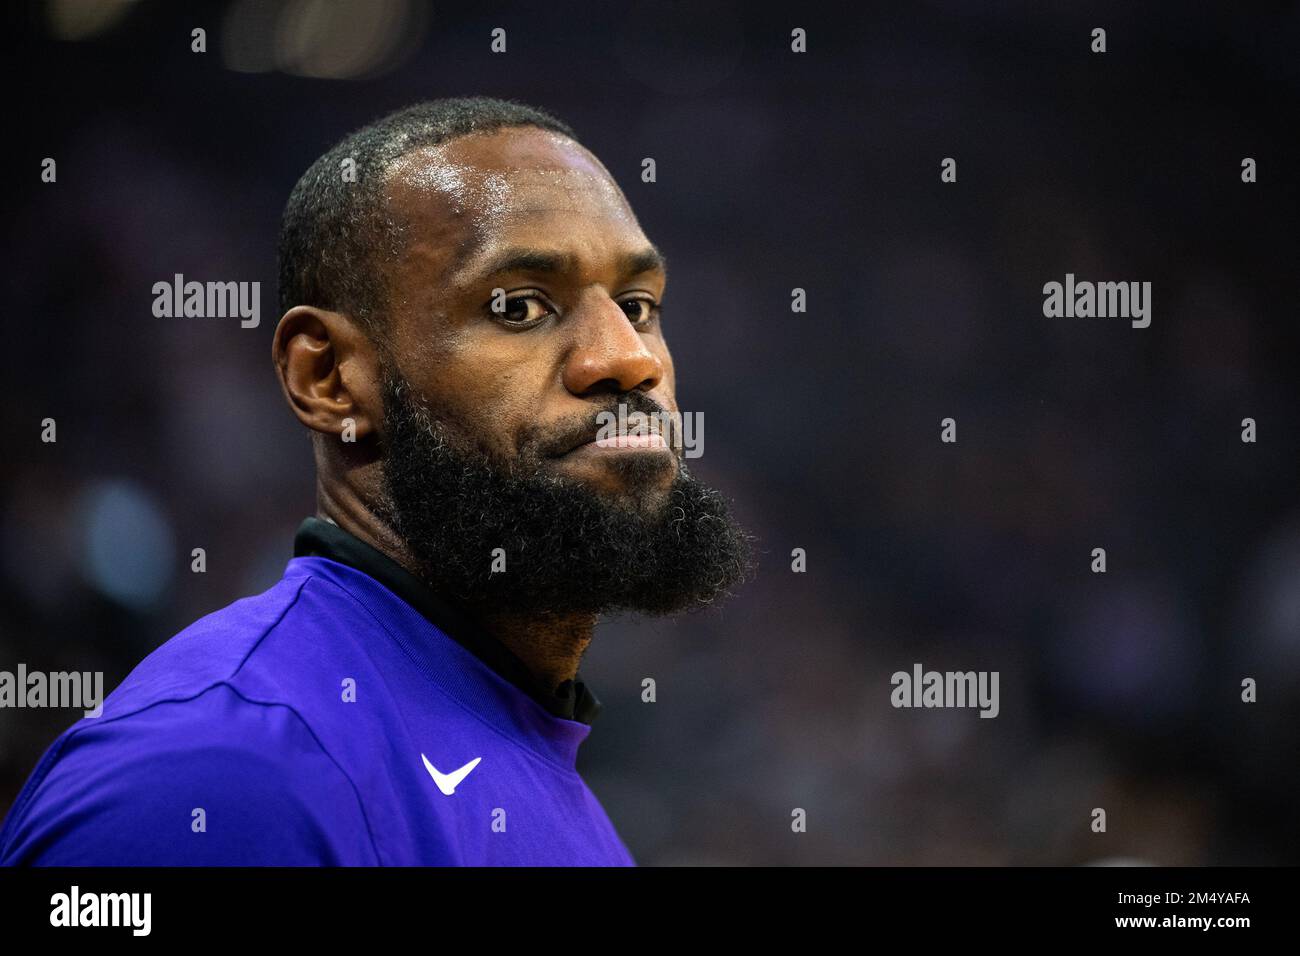 Sacramento, CA, USA. 21st Dec, 2022. Los Angeles Lakers forward LeBron  James (6) warms up before game against the Sacramento Kings at Golden 1  Center in Sacramento, Wednesday, Dec. 21, 2022. (Credit